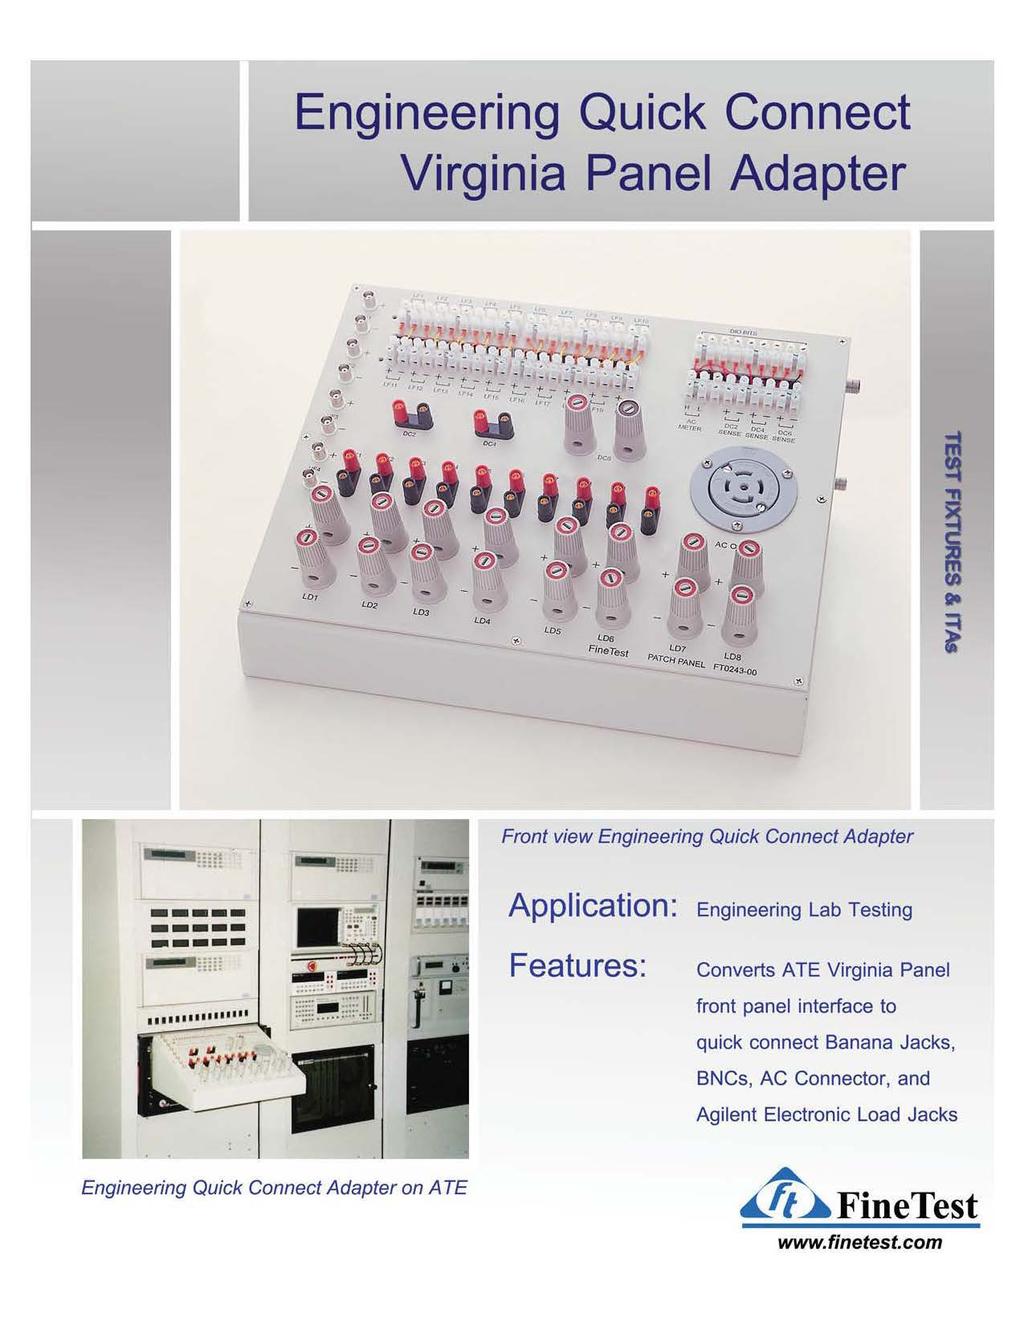 Engineering Quick Connect Virginia Panel Adapter ~.... ',_, -!/!! L.02 LDJ... tog Fine rest... - Front view Engineering Quick Connect Adapter ----- ----- ~g ::::: 1:.!!!1 ":;::.